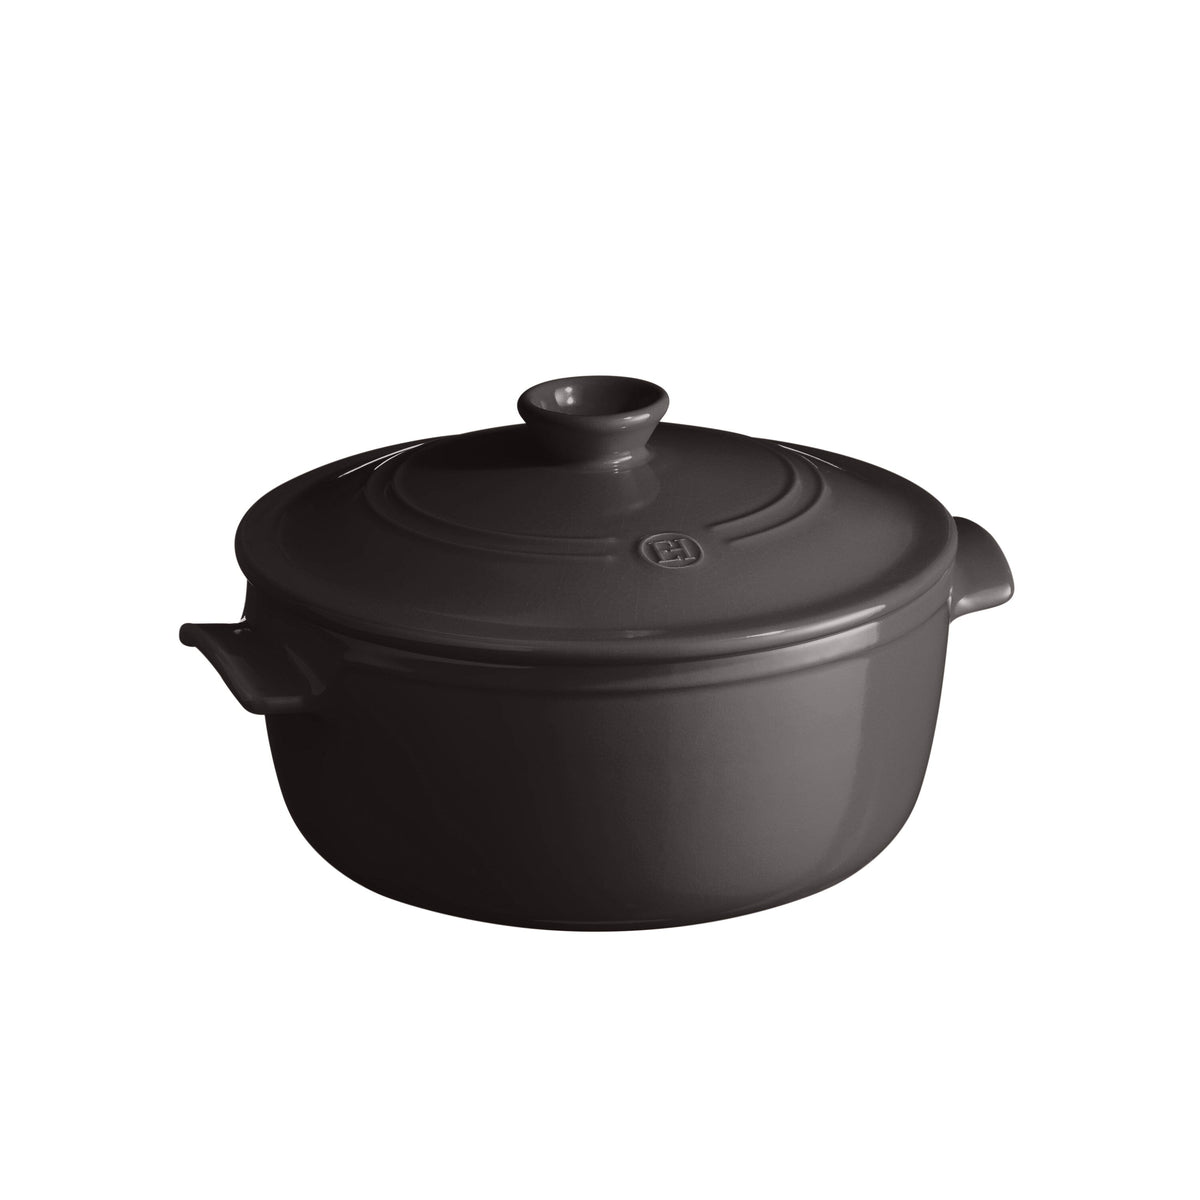 Emile Henry Made In France Flame Oval Stewpot Dutch Oven, 6.3